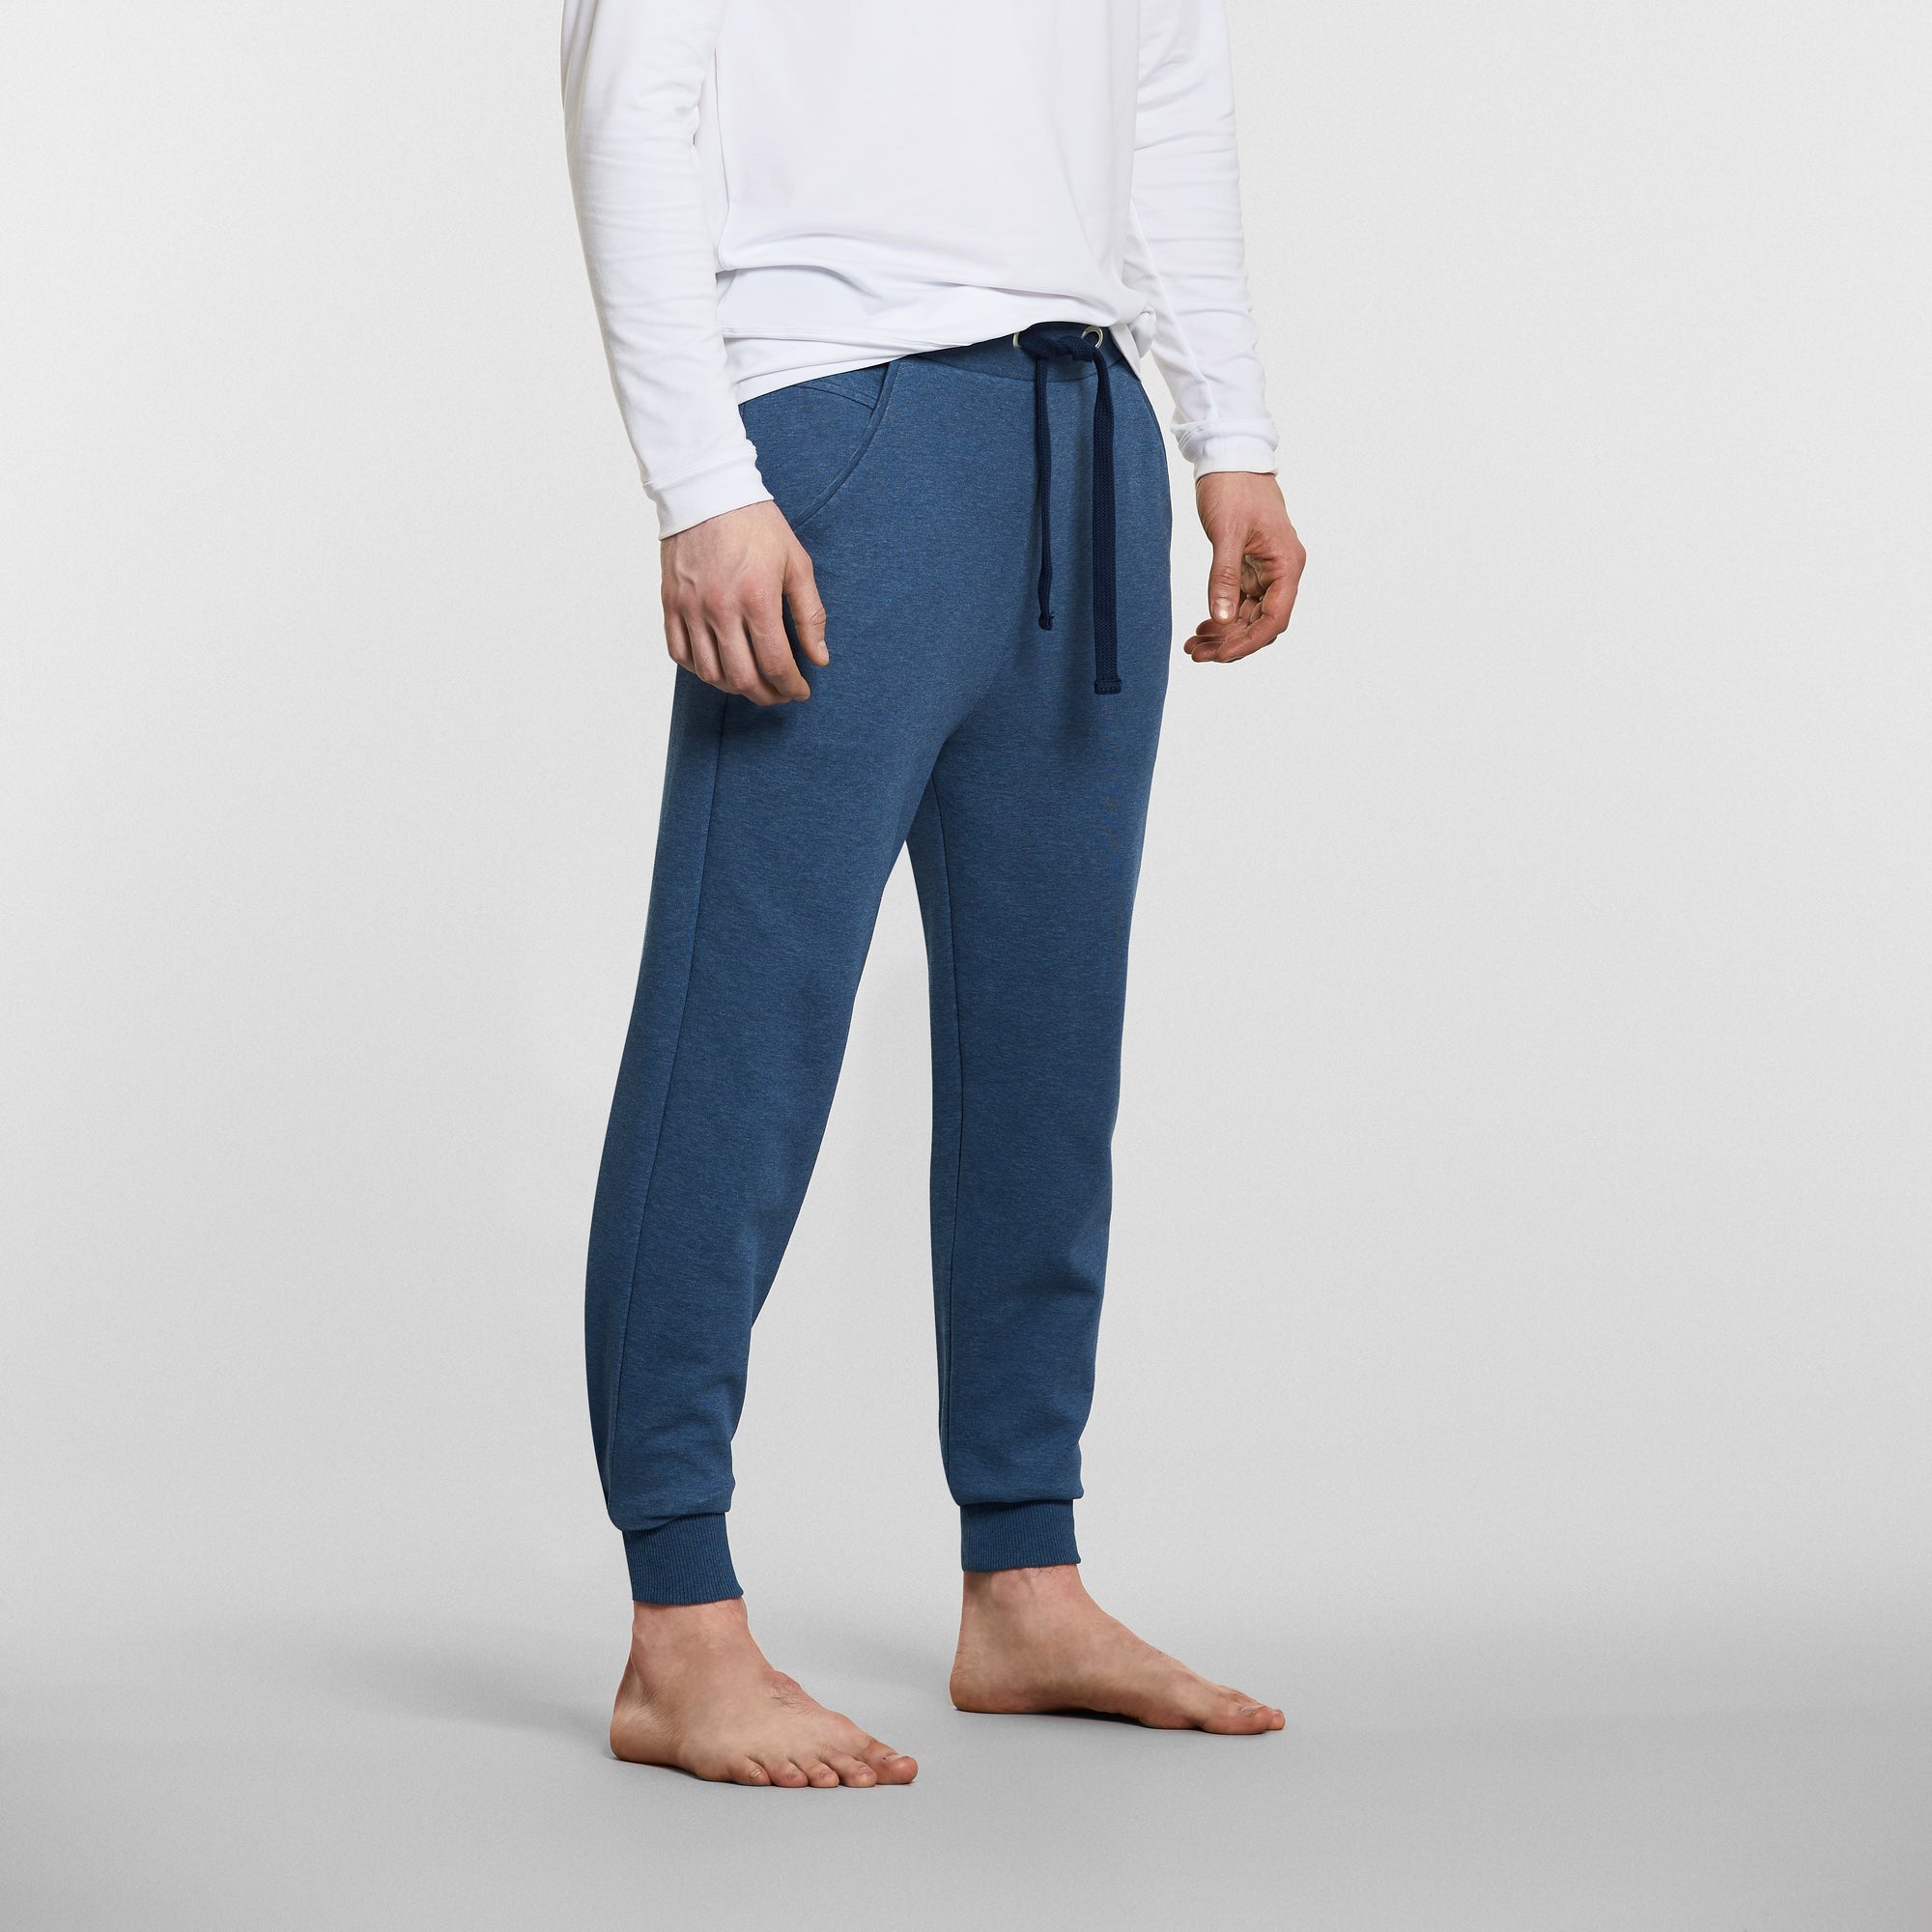 man in blue mens yoga pants by warrior addict 